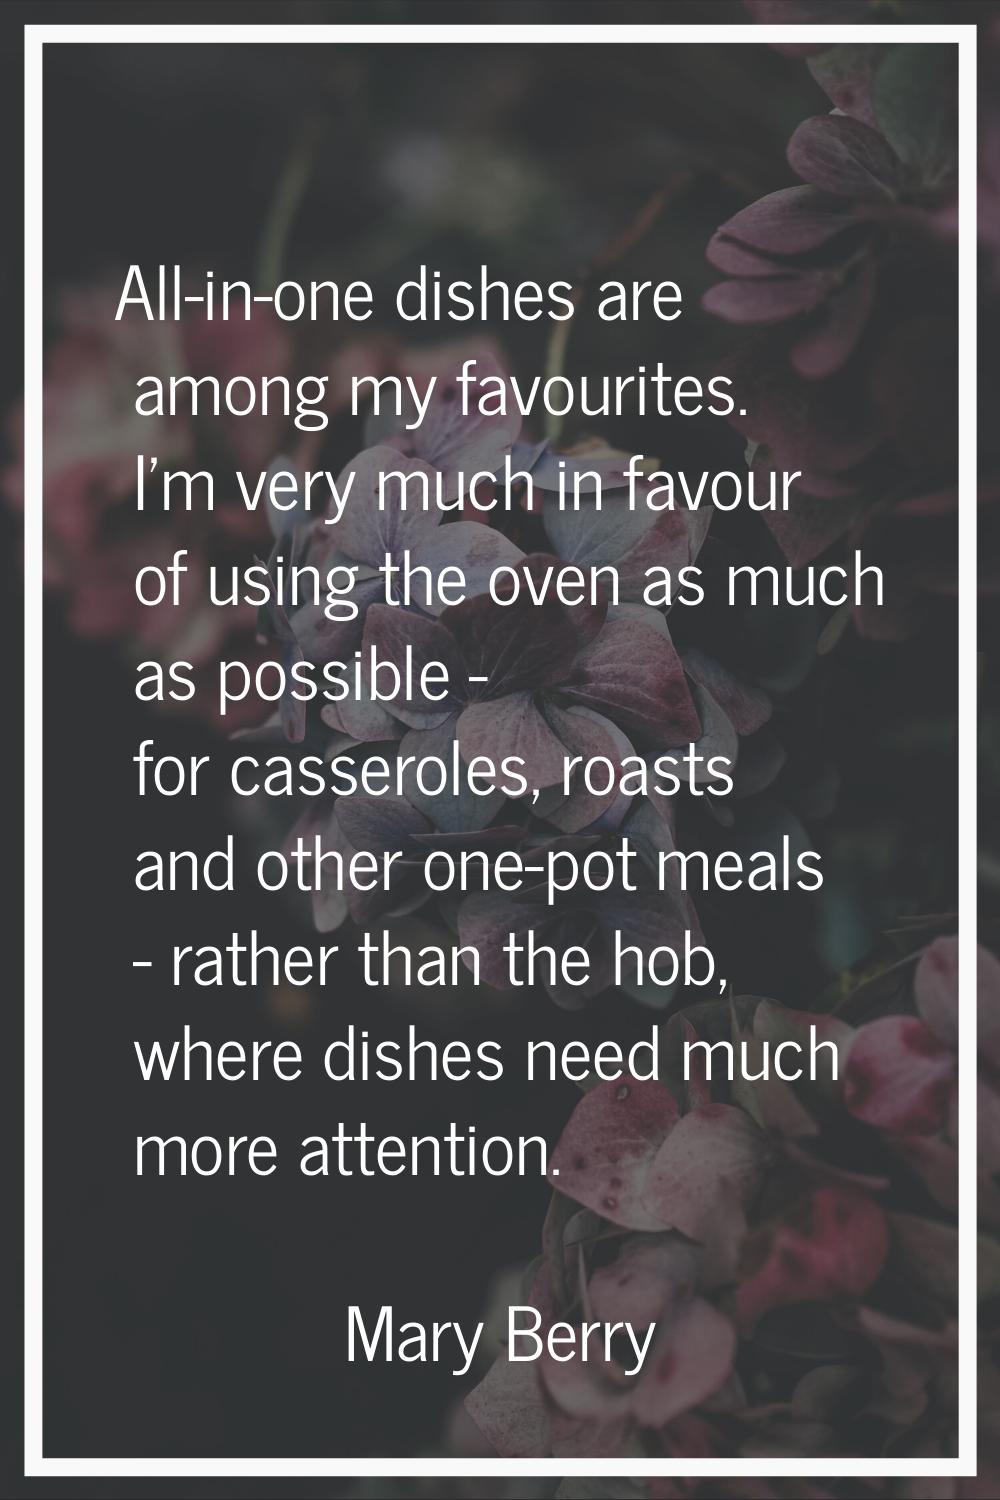 All-in-one dishes are among my favourites. I'm very much in favour of using the oven as much as pos